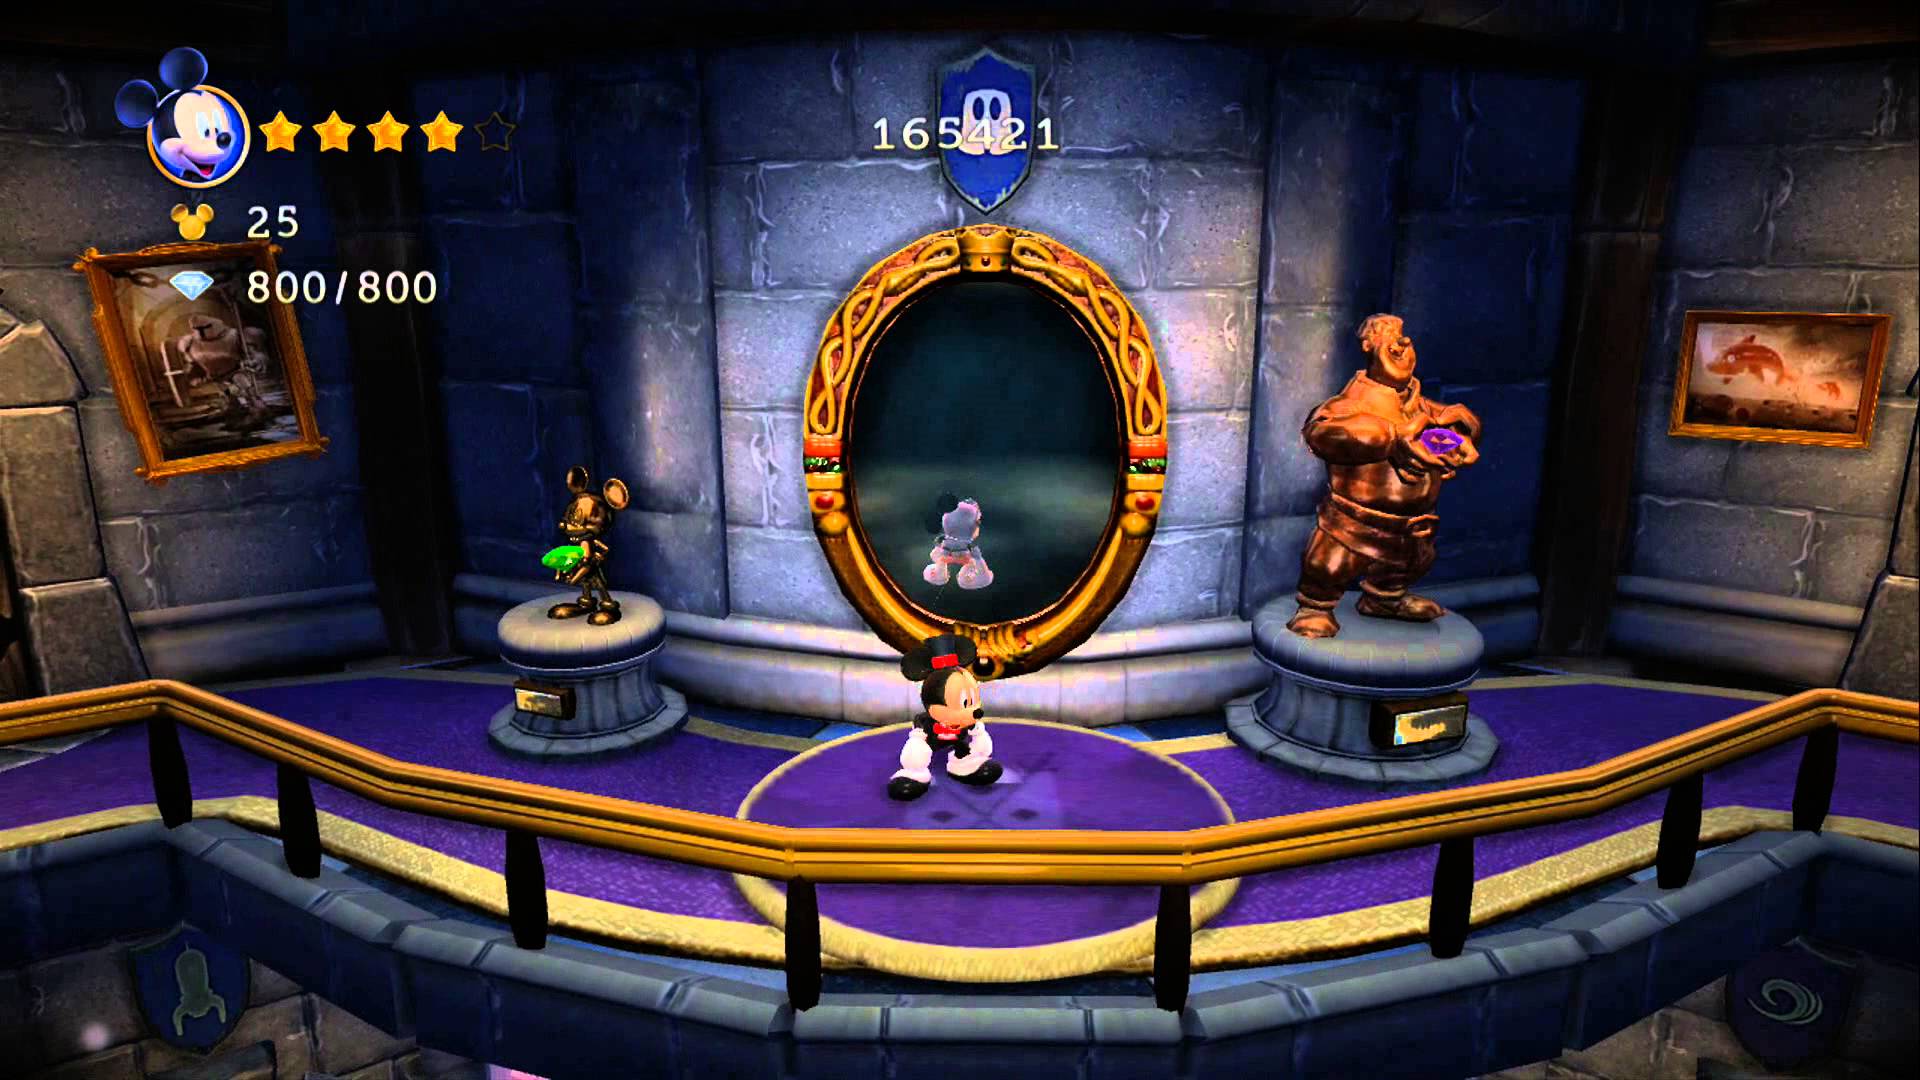 castle of illusion starring mickey mouse wiki